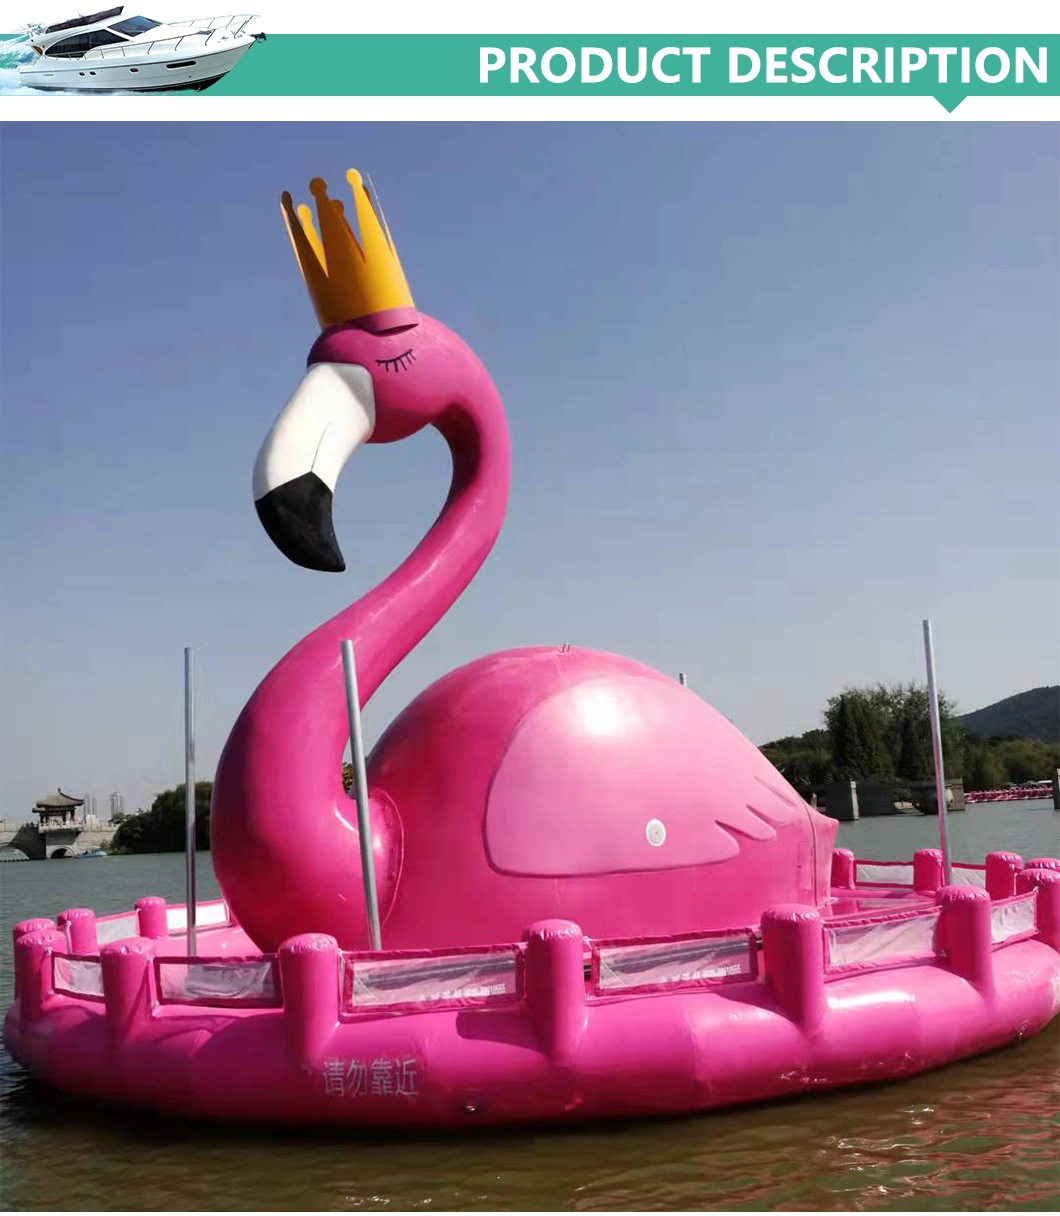 Giant Flamingo Shaped Floating Island Platform with Bright Color